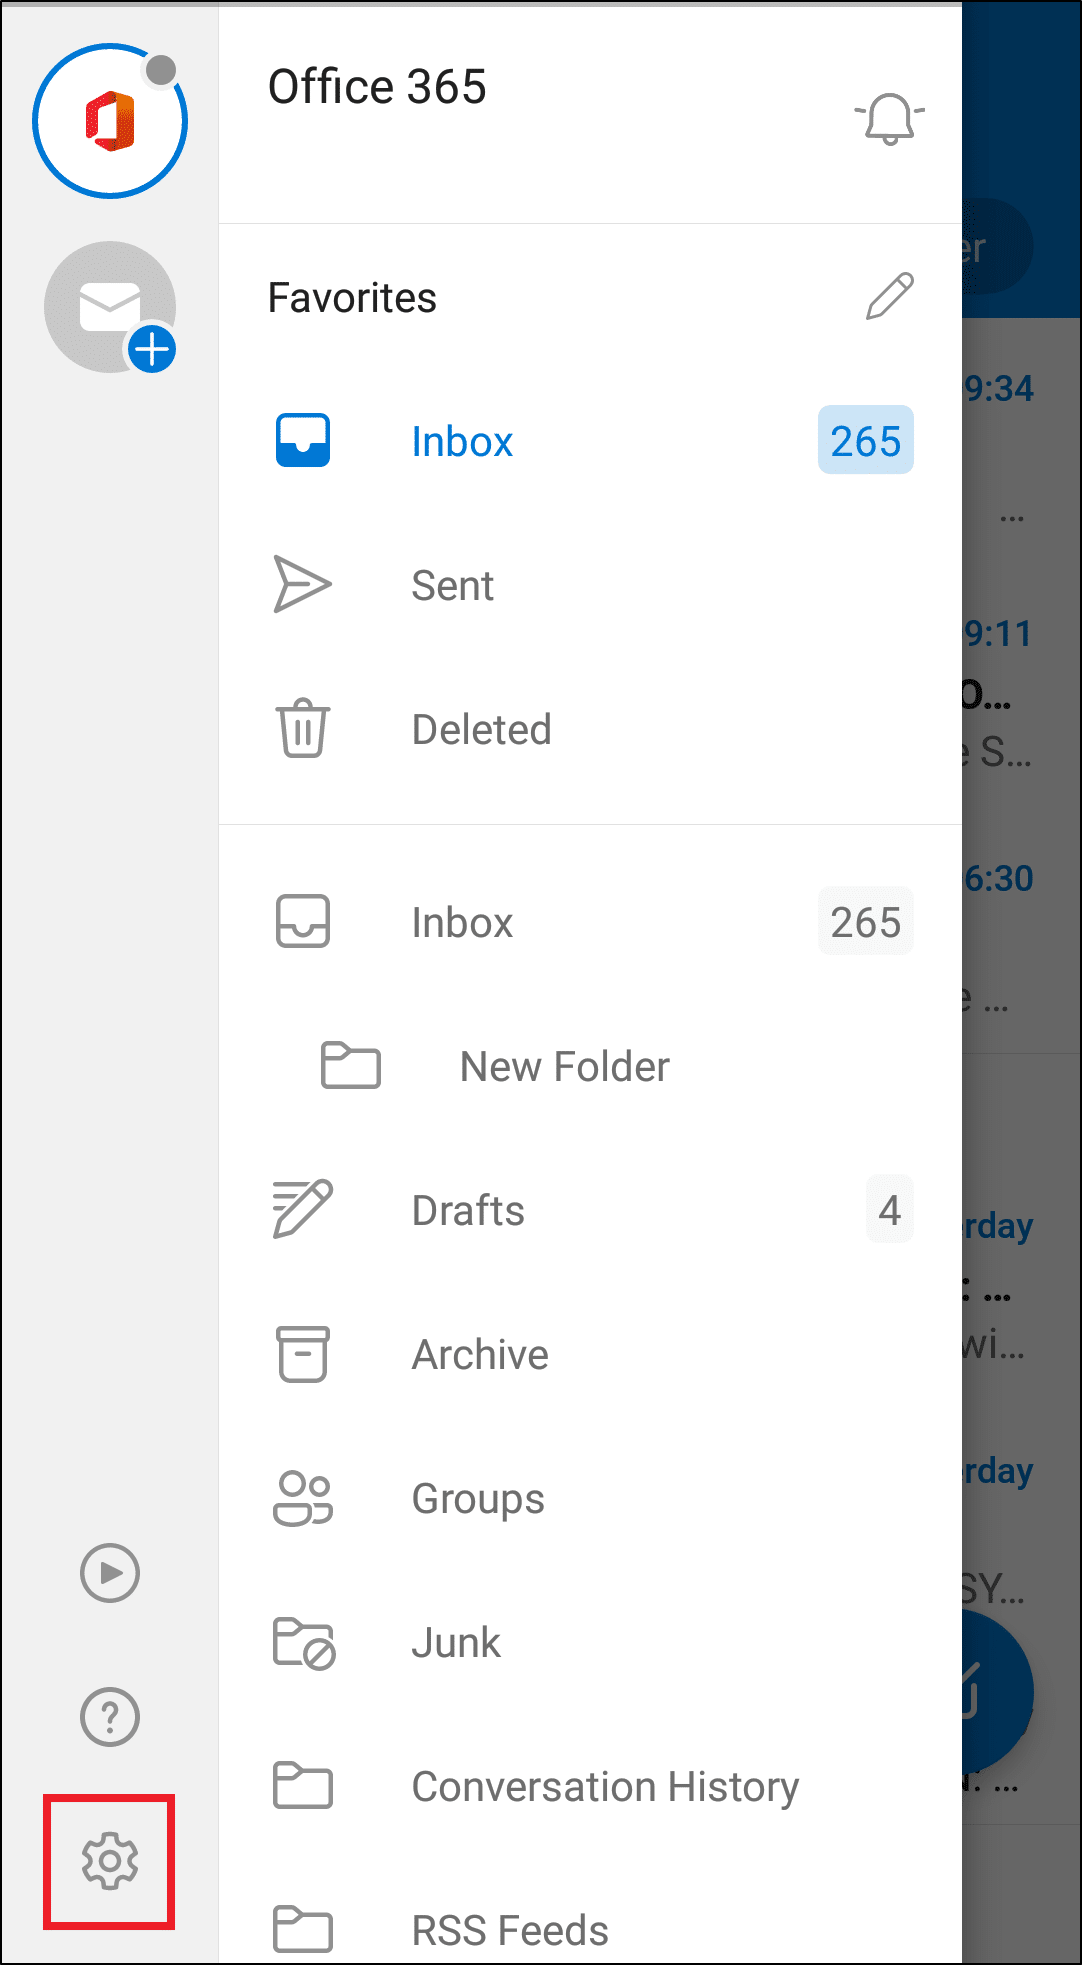 access settings menu on Microsoft Outlook mobile app to log back in and fix Microsoft Outlook app email notifications not working on iOS or Android